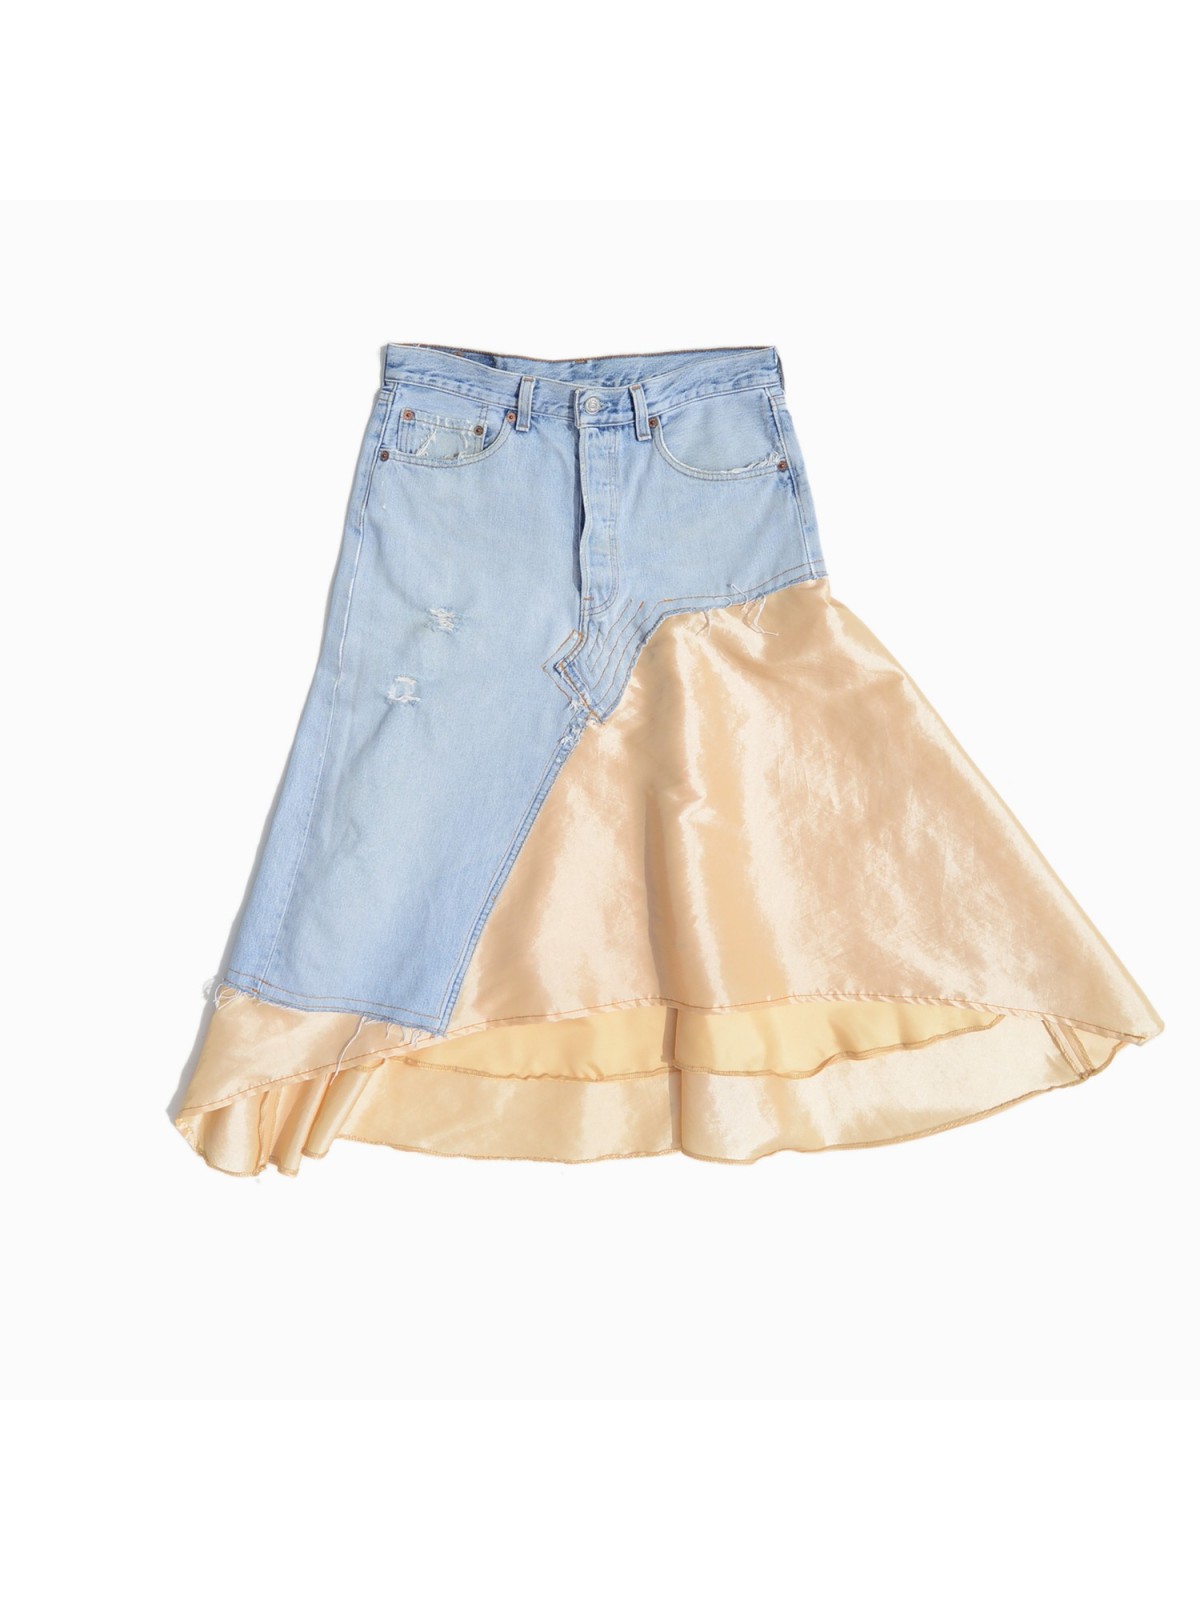 Upcycled denim skirt with a beige skirt